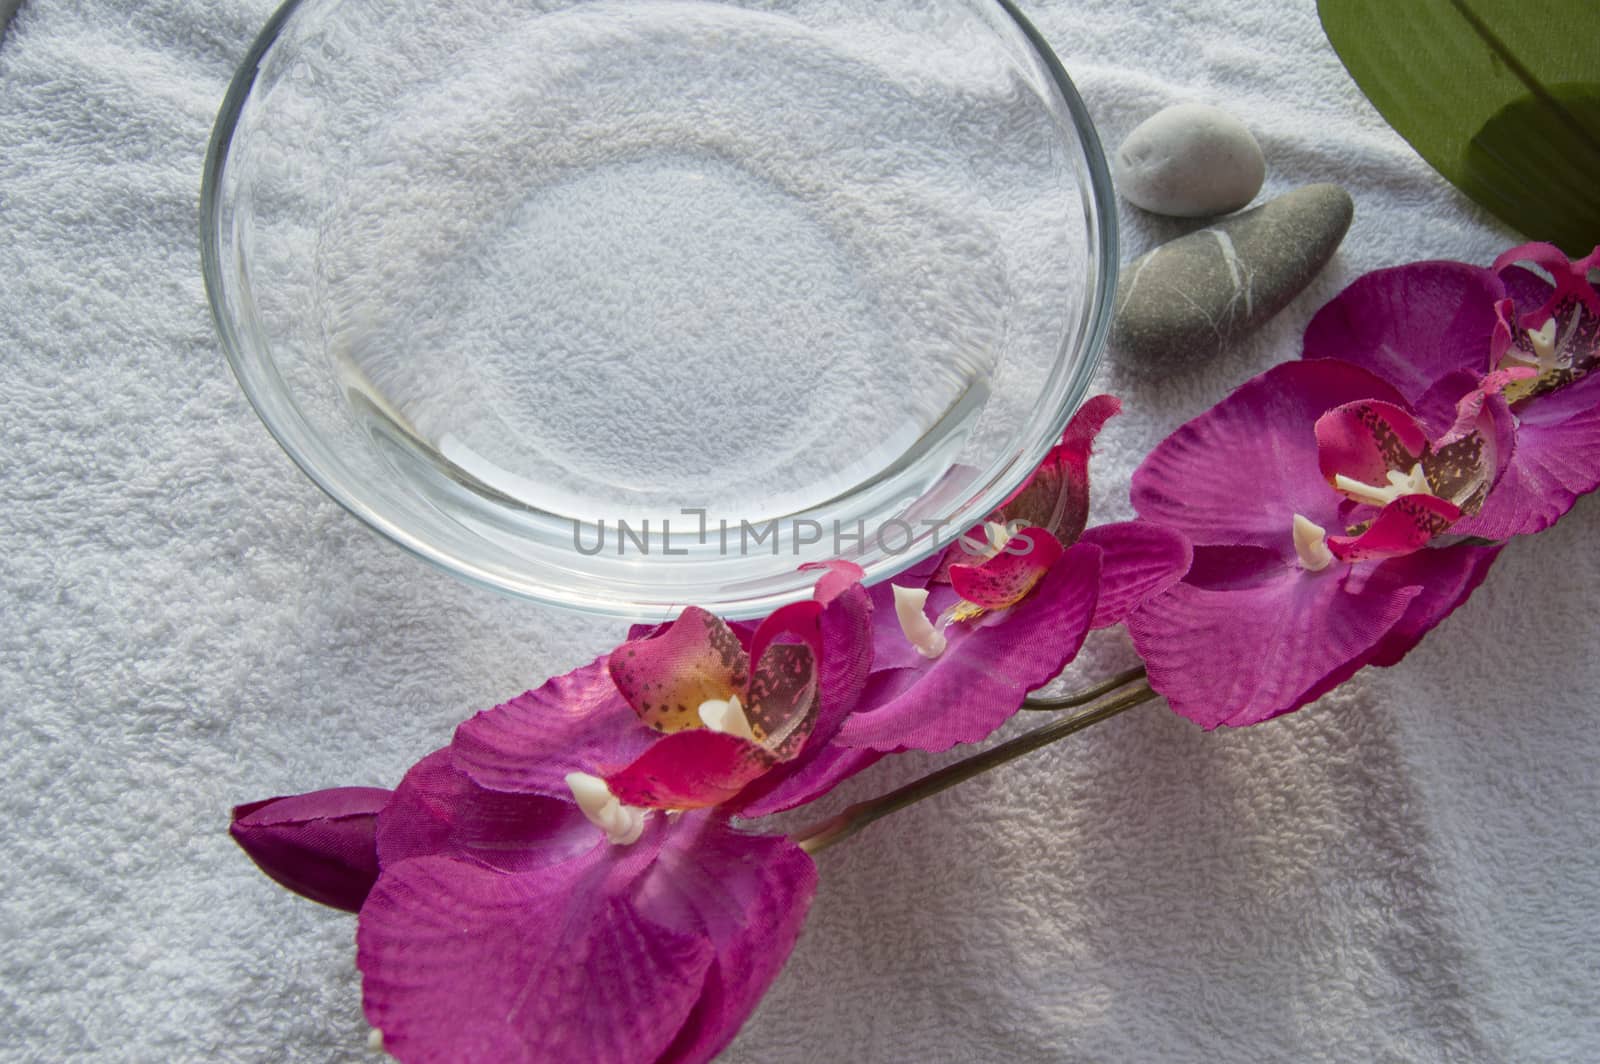 Water bowl and Spa manicure accessories, Orchid on white background by claire_lucia